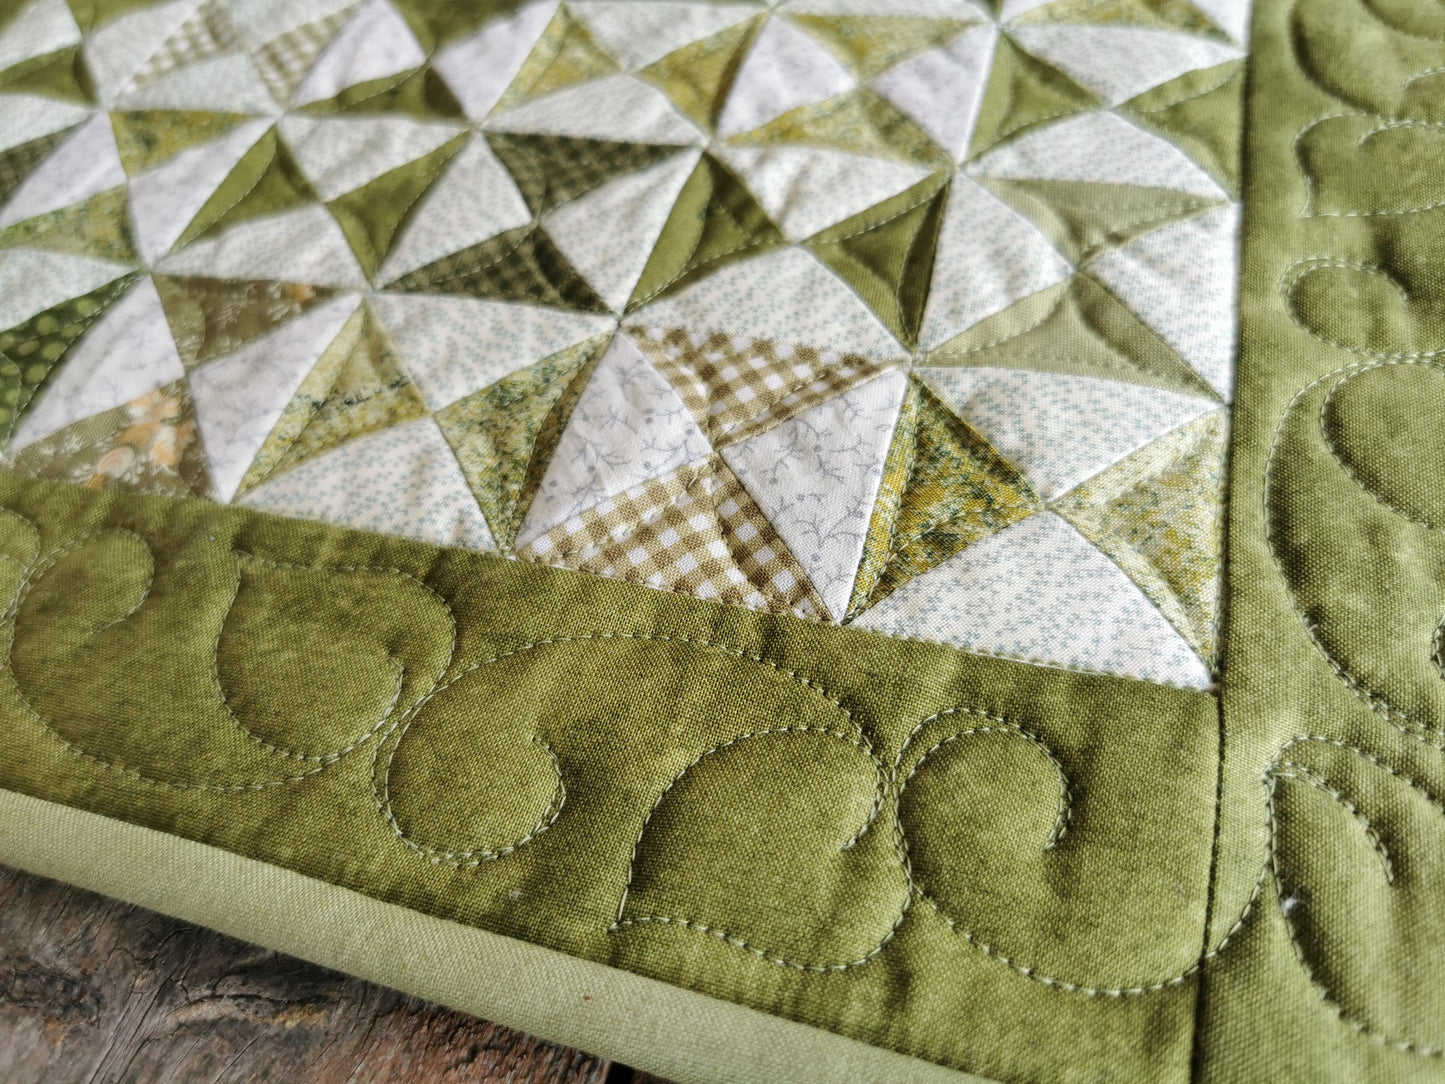 A close up shot of the quilted table runner showing stitching detail and leafy vine border stitching. 